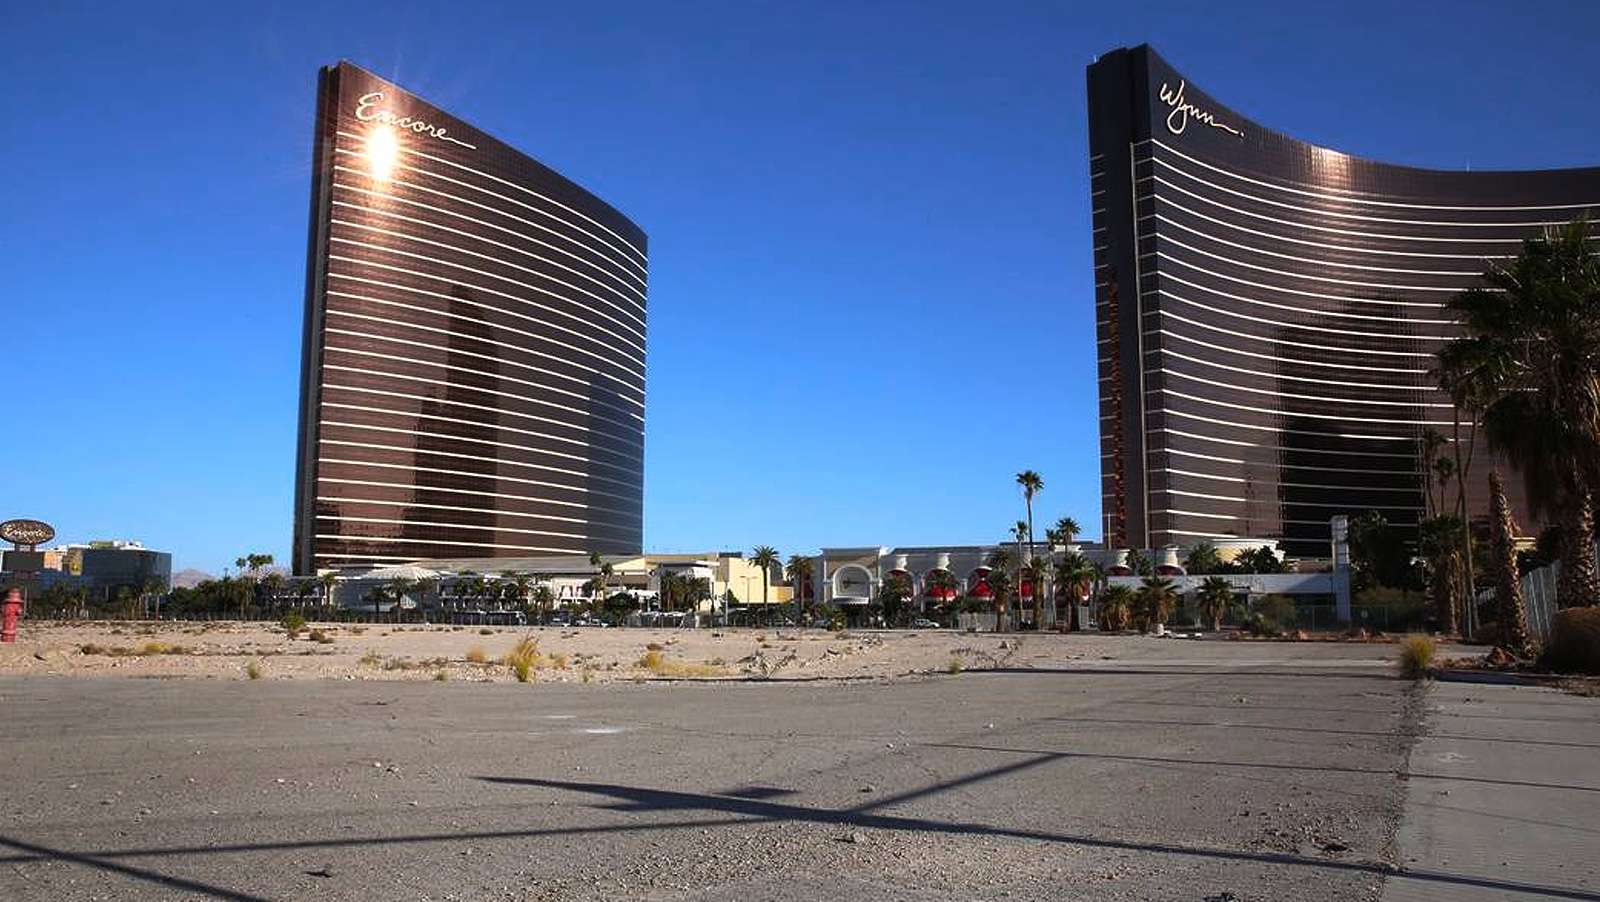 Wynn Resorts, former CEO face new lawsuit from shareholder